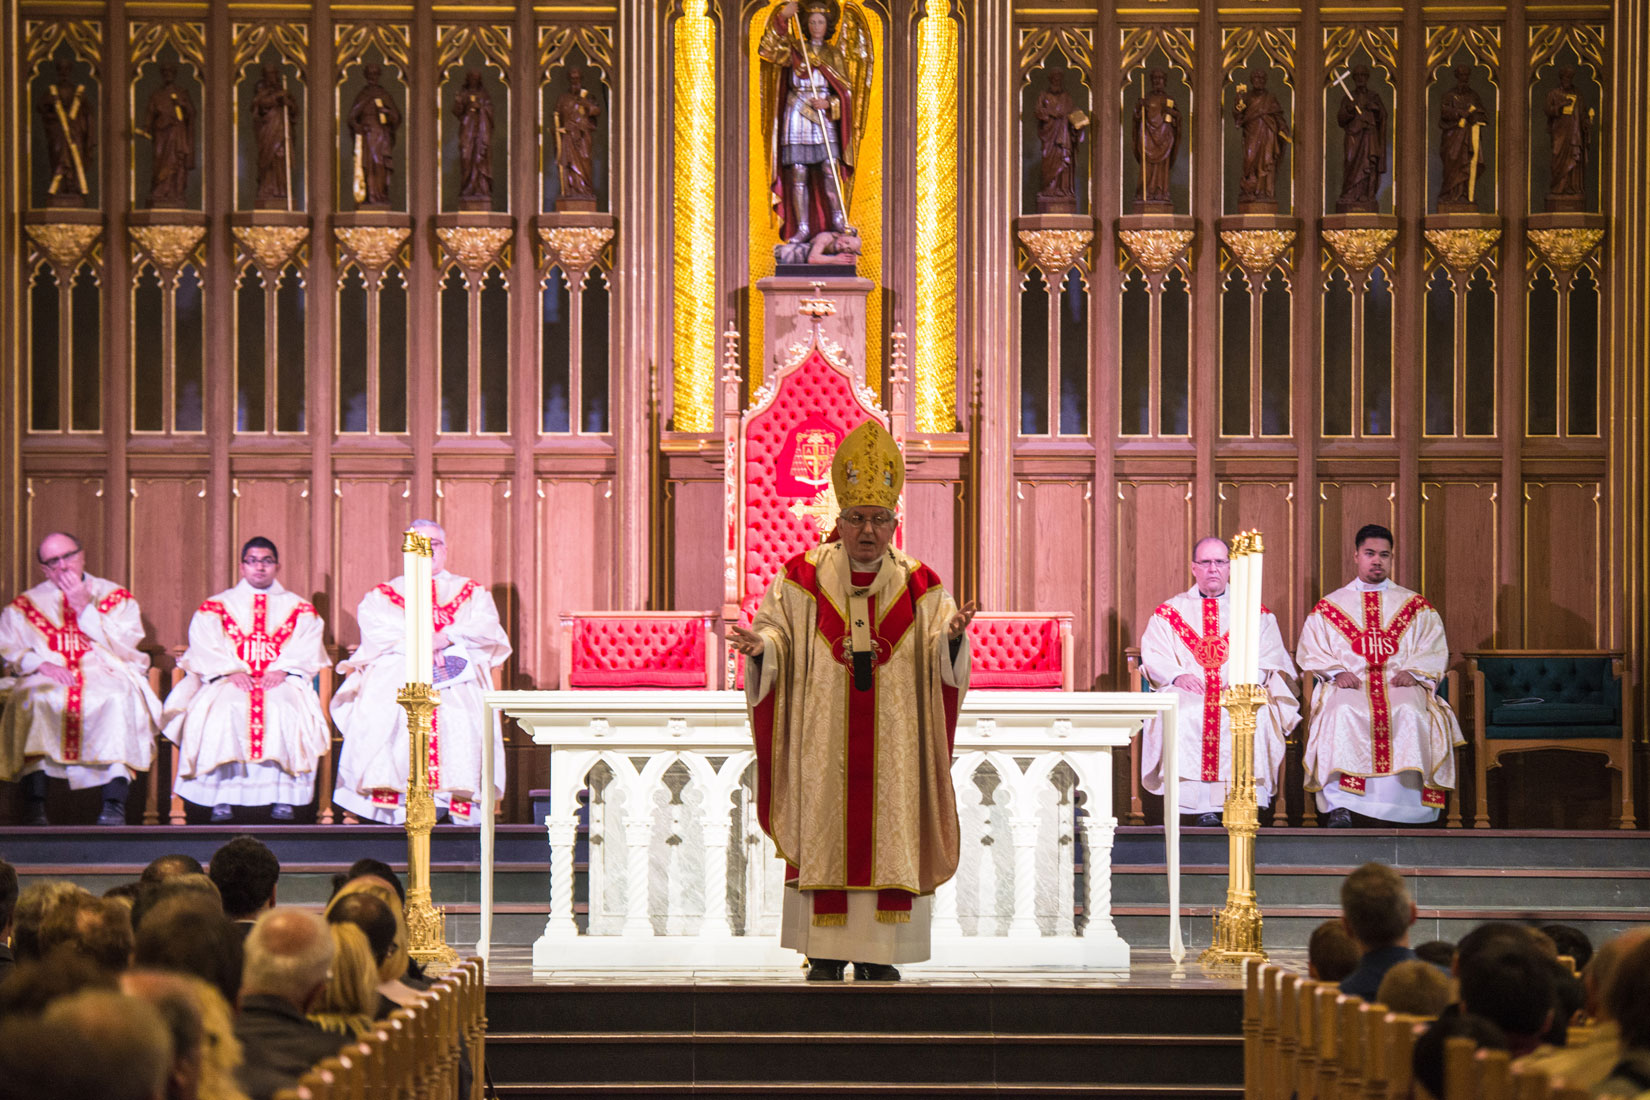 Cardinal Collins preaching at the workers’ thanksgiving Mass at St. Michael’s Cathedral Sept. 30. (Photo by Michael Swan)